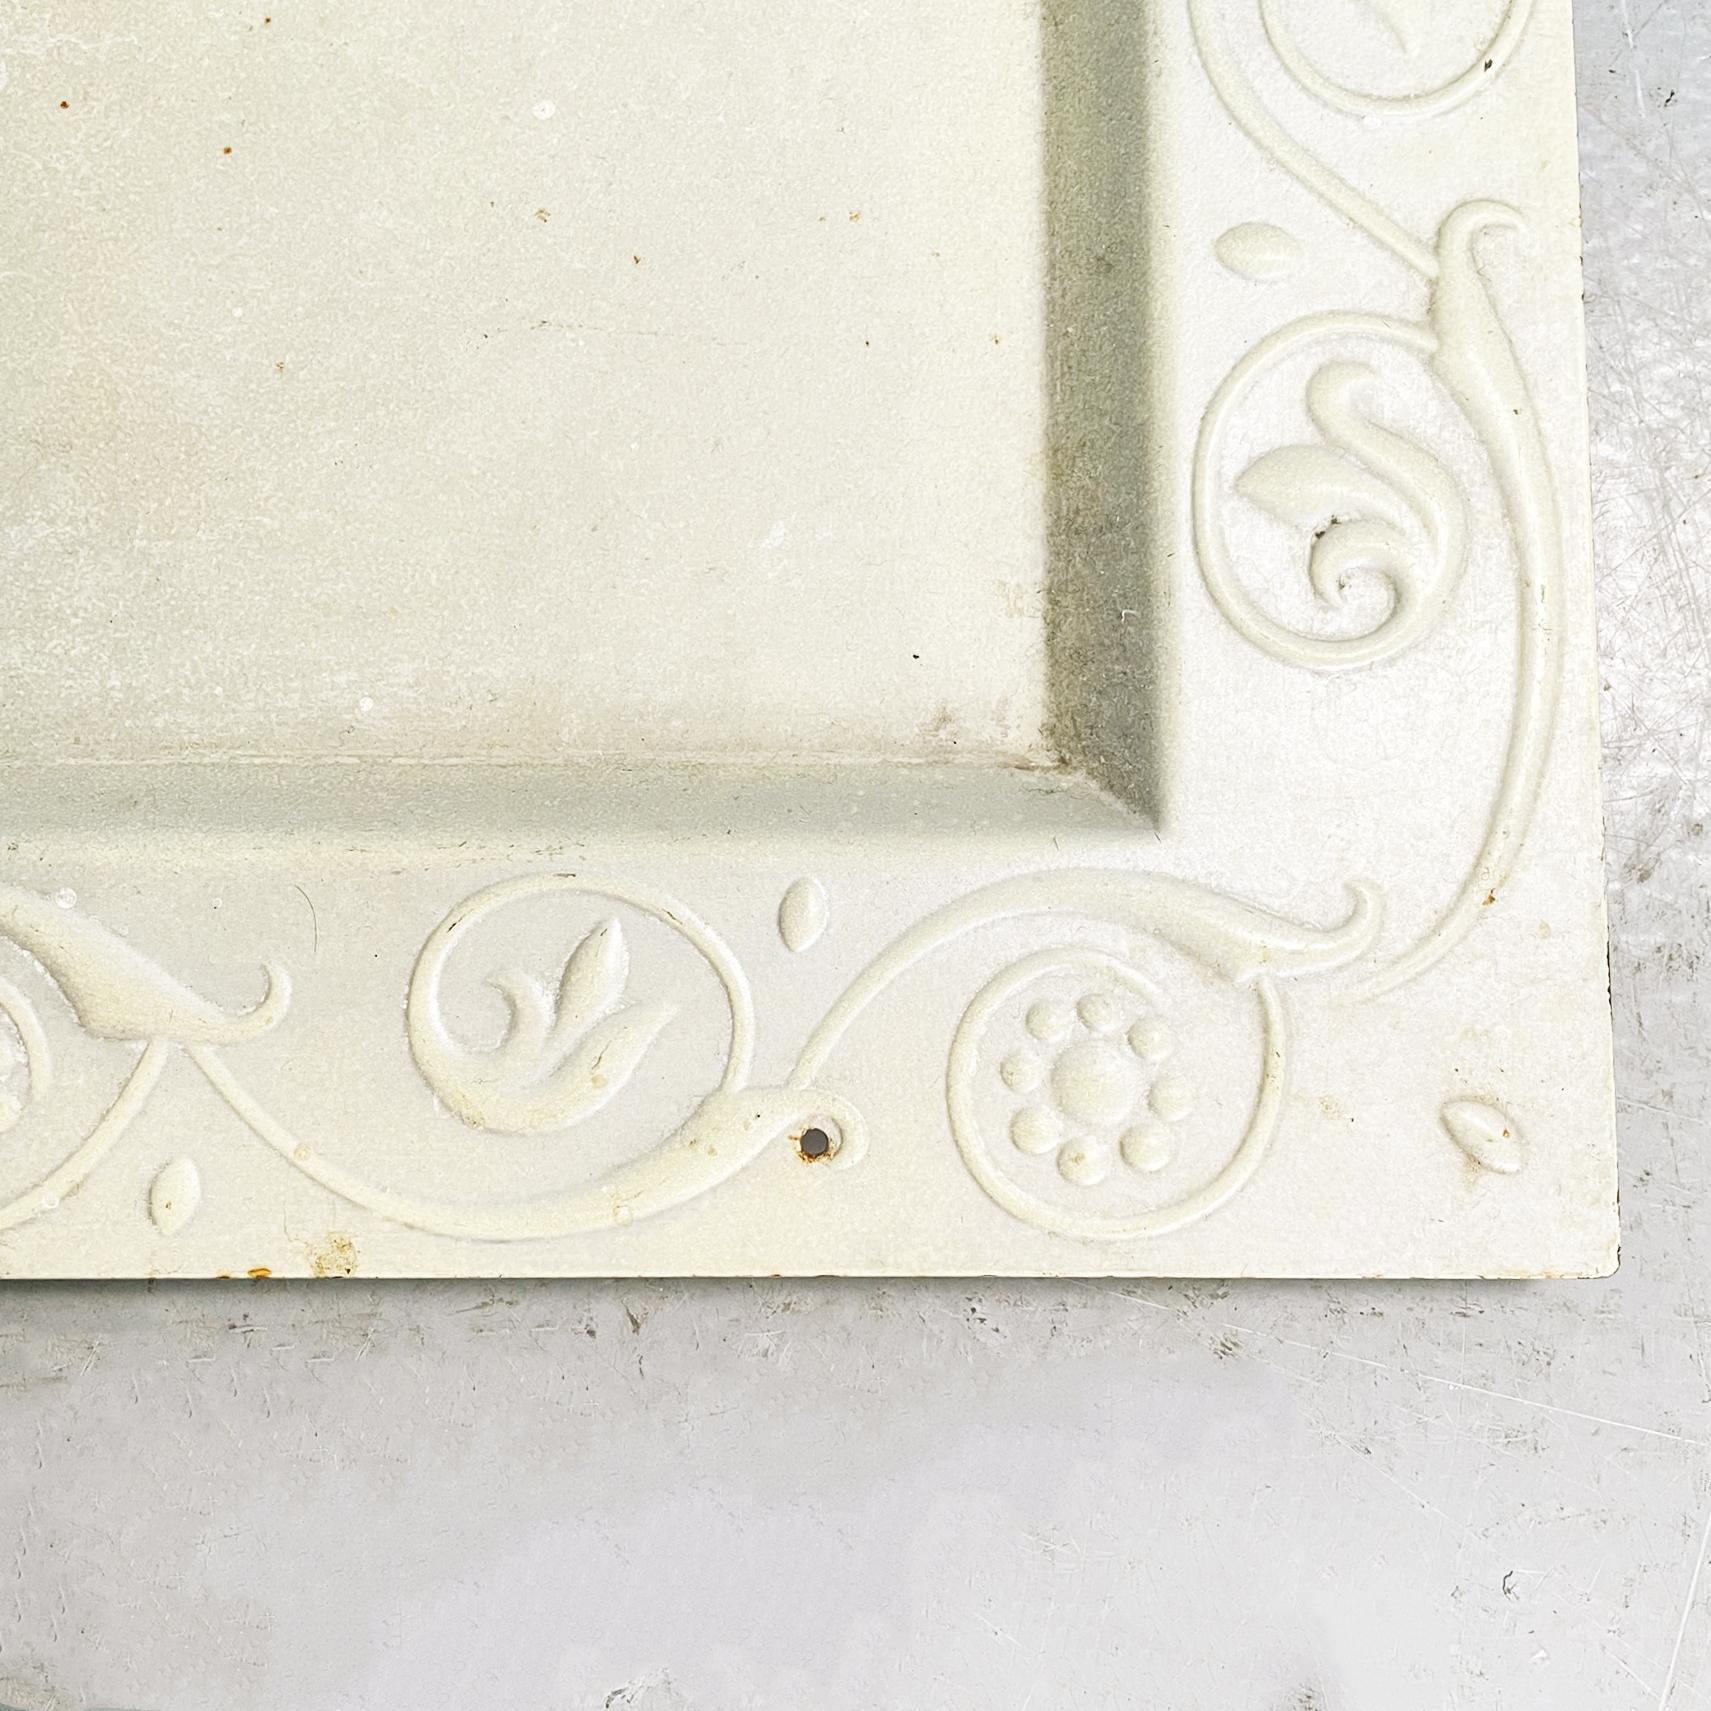 Late 20th Century Italian Modern Tray in Beige Iron with Curls Pattern Decorations, 1990s For Sale